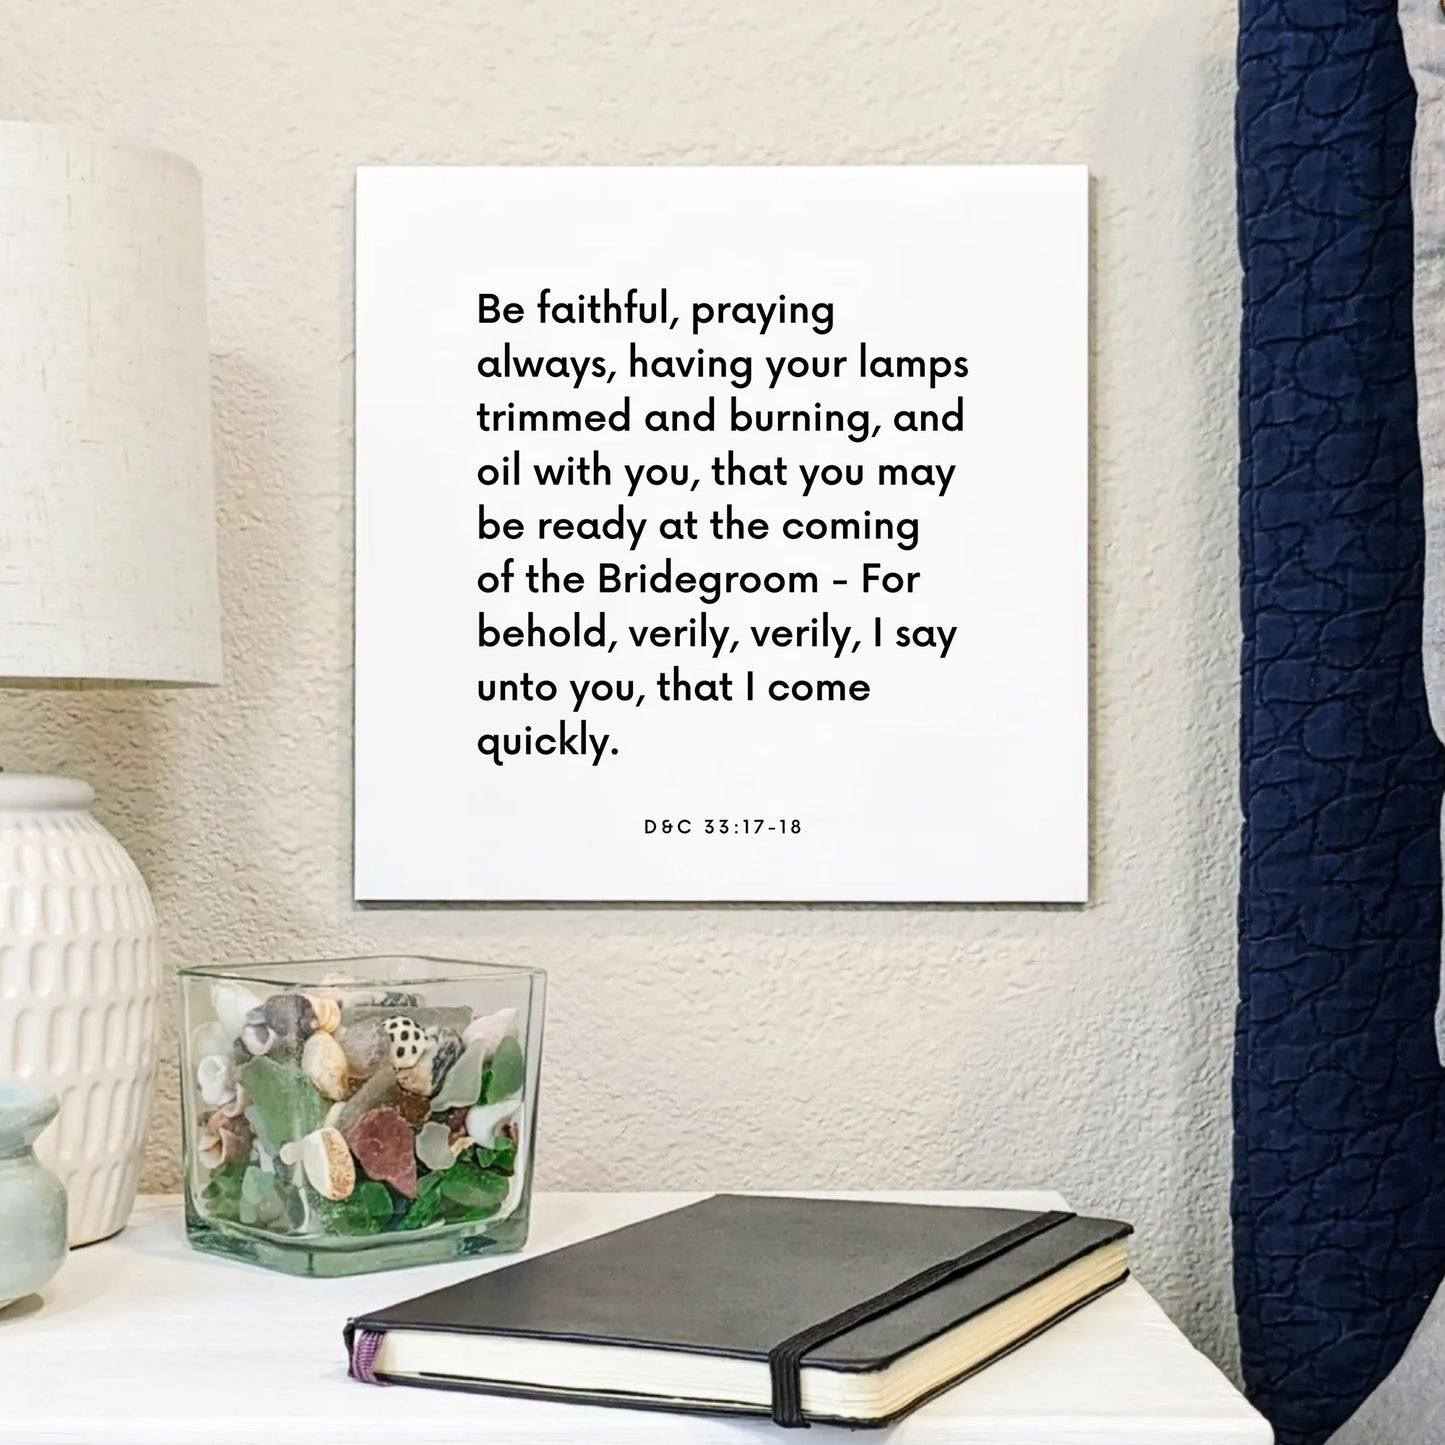 Bedside mouting of the scripture tile for D&C 33:17-18 - "Be faithful, praying always, having your lamps trimmed"